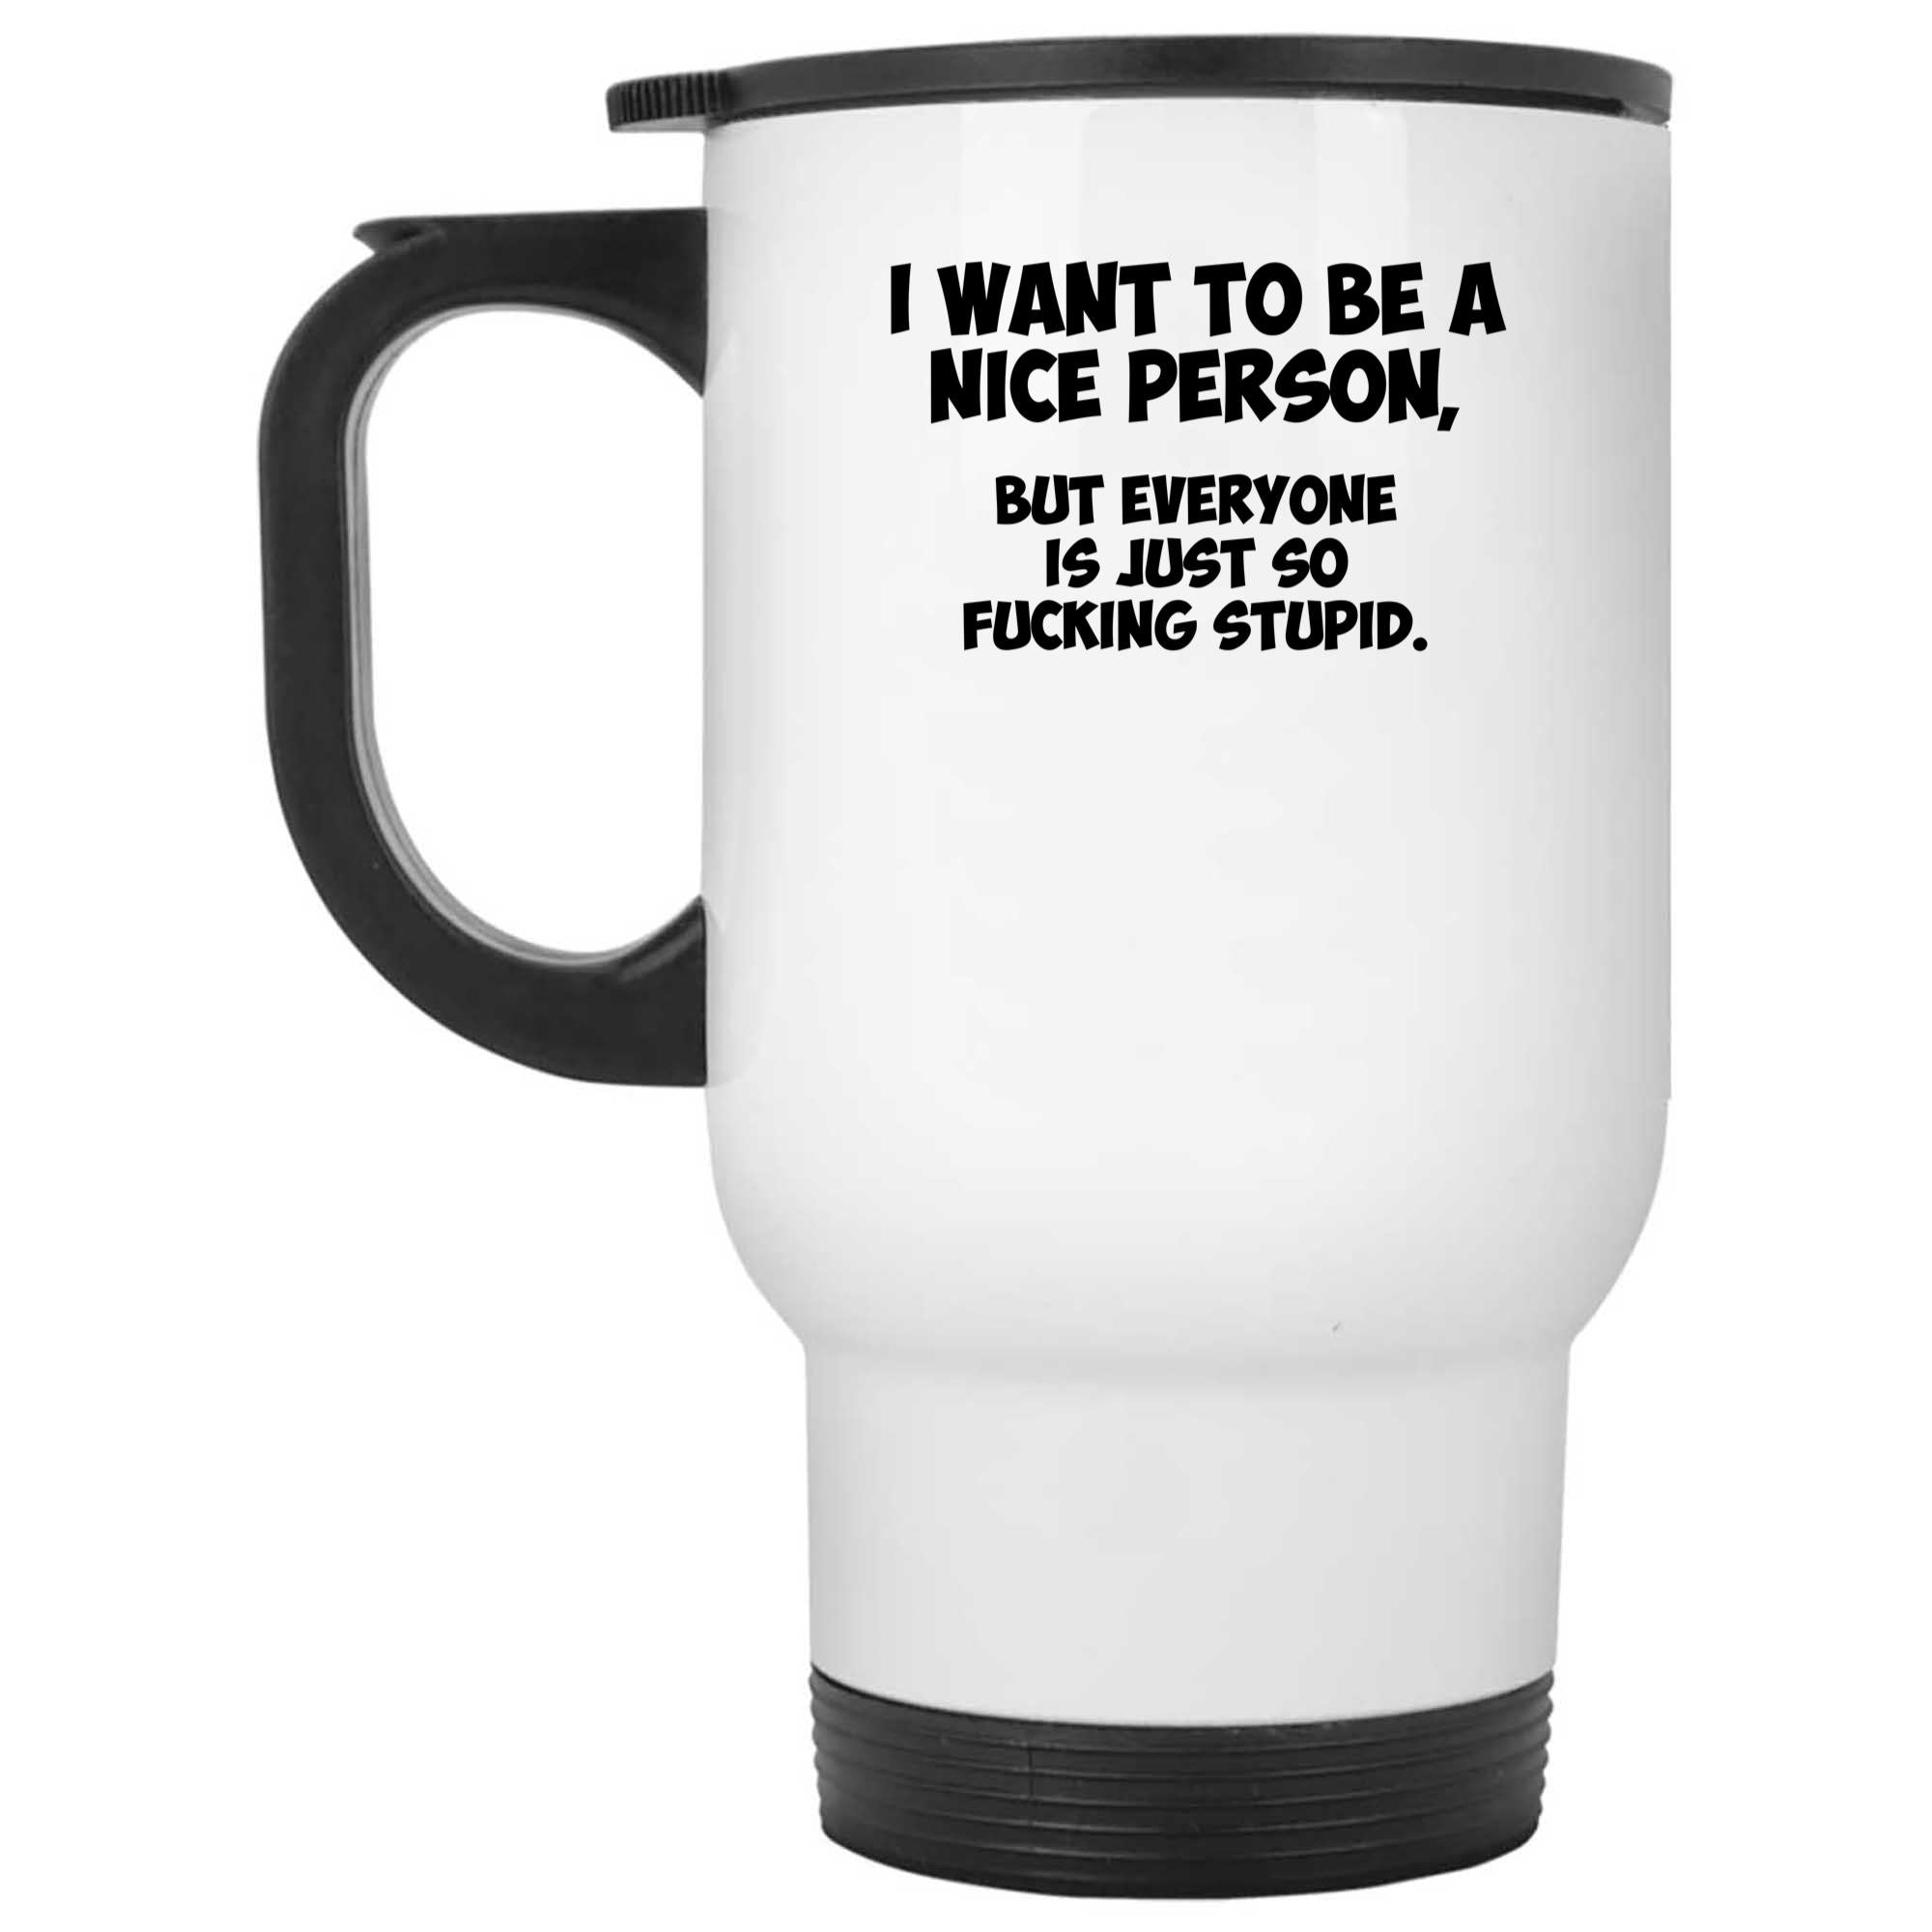 Skitongifts Funny Ceramic Novelty Coffee Mug I Want To Be A Nice Person, But Everyone Is Just So Fucking Stupid 4Wc8Y1t